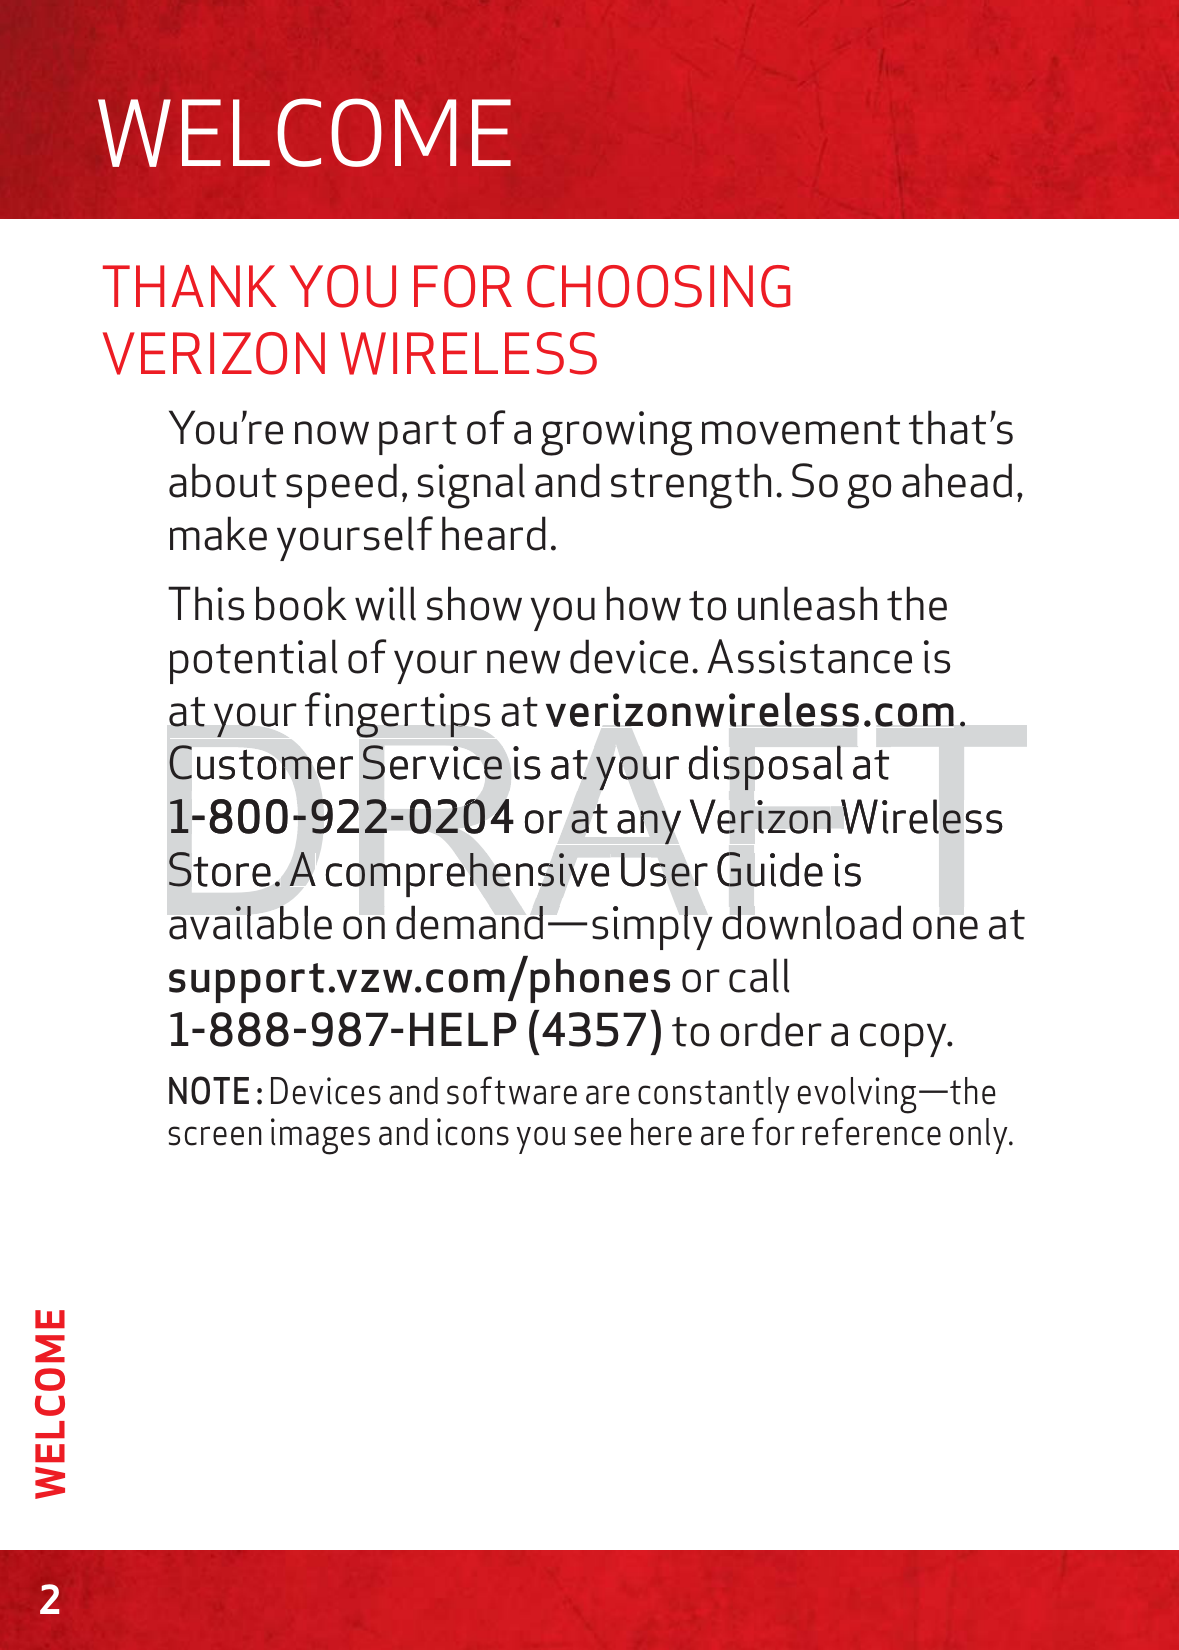 THANK YOU FOR CHOOSING VERIZON WIRELESSYou’re now part of a growing movement that’s about speed, signal and strength. So go ahead, make yourself heard. This book will show you how to unleash the potential of your new device. Assistance is at your fingertips at verizonwireless.com. Customer Service is at your disposal at 1-800-922-0204 or at any Verizon Wireless Store. A comprehensive User Guide is available on demand—simply download one at support.vzw.com/phones or call  1-888-987-HELP (4357) to order a copy.NOTE : Devices and software are constantly evolving—the screen images and icons you see here are for reference only.WELCOME2WELCOMEDRAFTat your fingertips at at your fingertips verizonwireless.comrizonwireless.com.. Customer Service is at your disposal at Customer Service is at your disposal at 1-800-922-02041-800-922-0204 or at any Verizonr at any VerizonWiWrelesseStore. Store. AA com comprehensive ehensive UUser Gser Guide isuil bl d d i l d l d til bl d d i l d l d